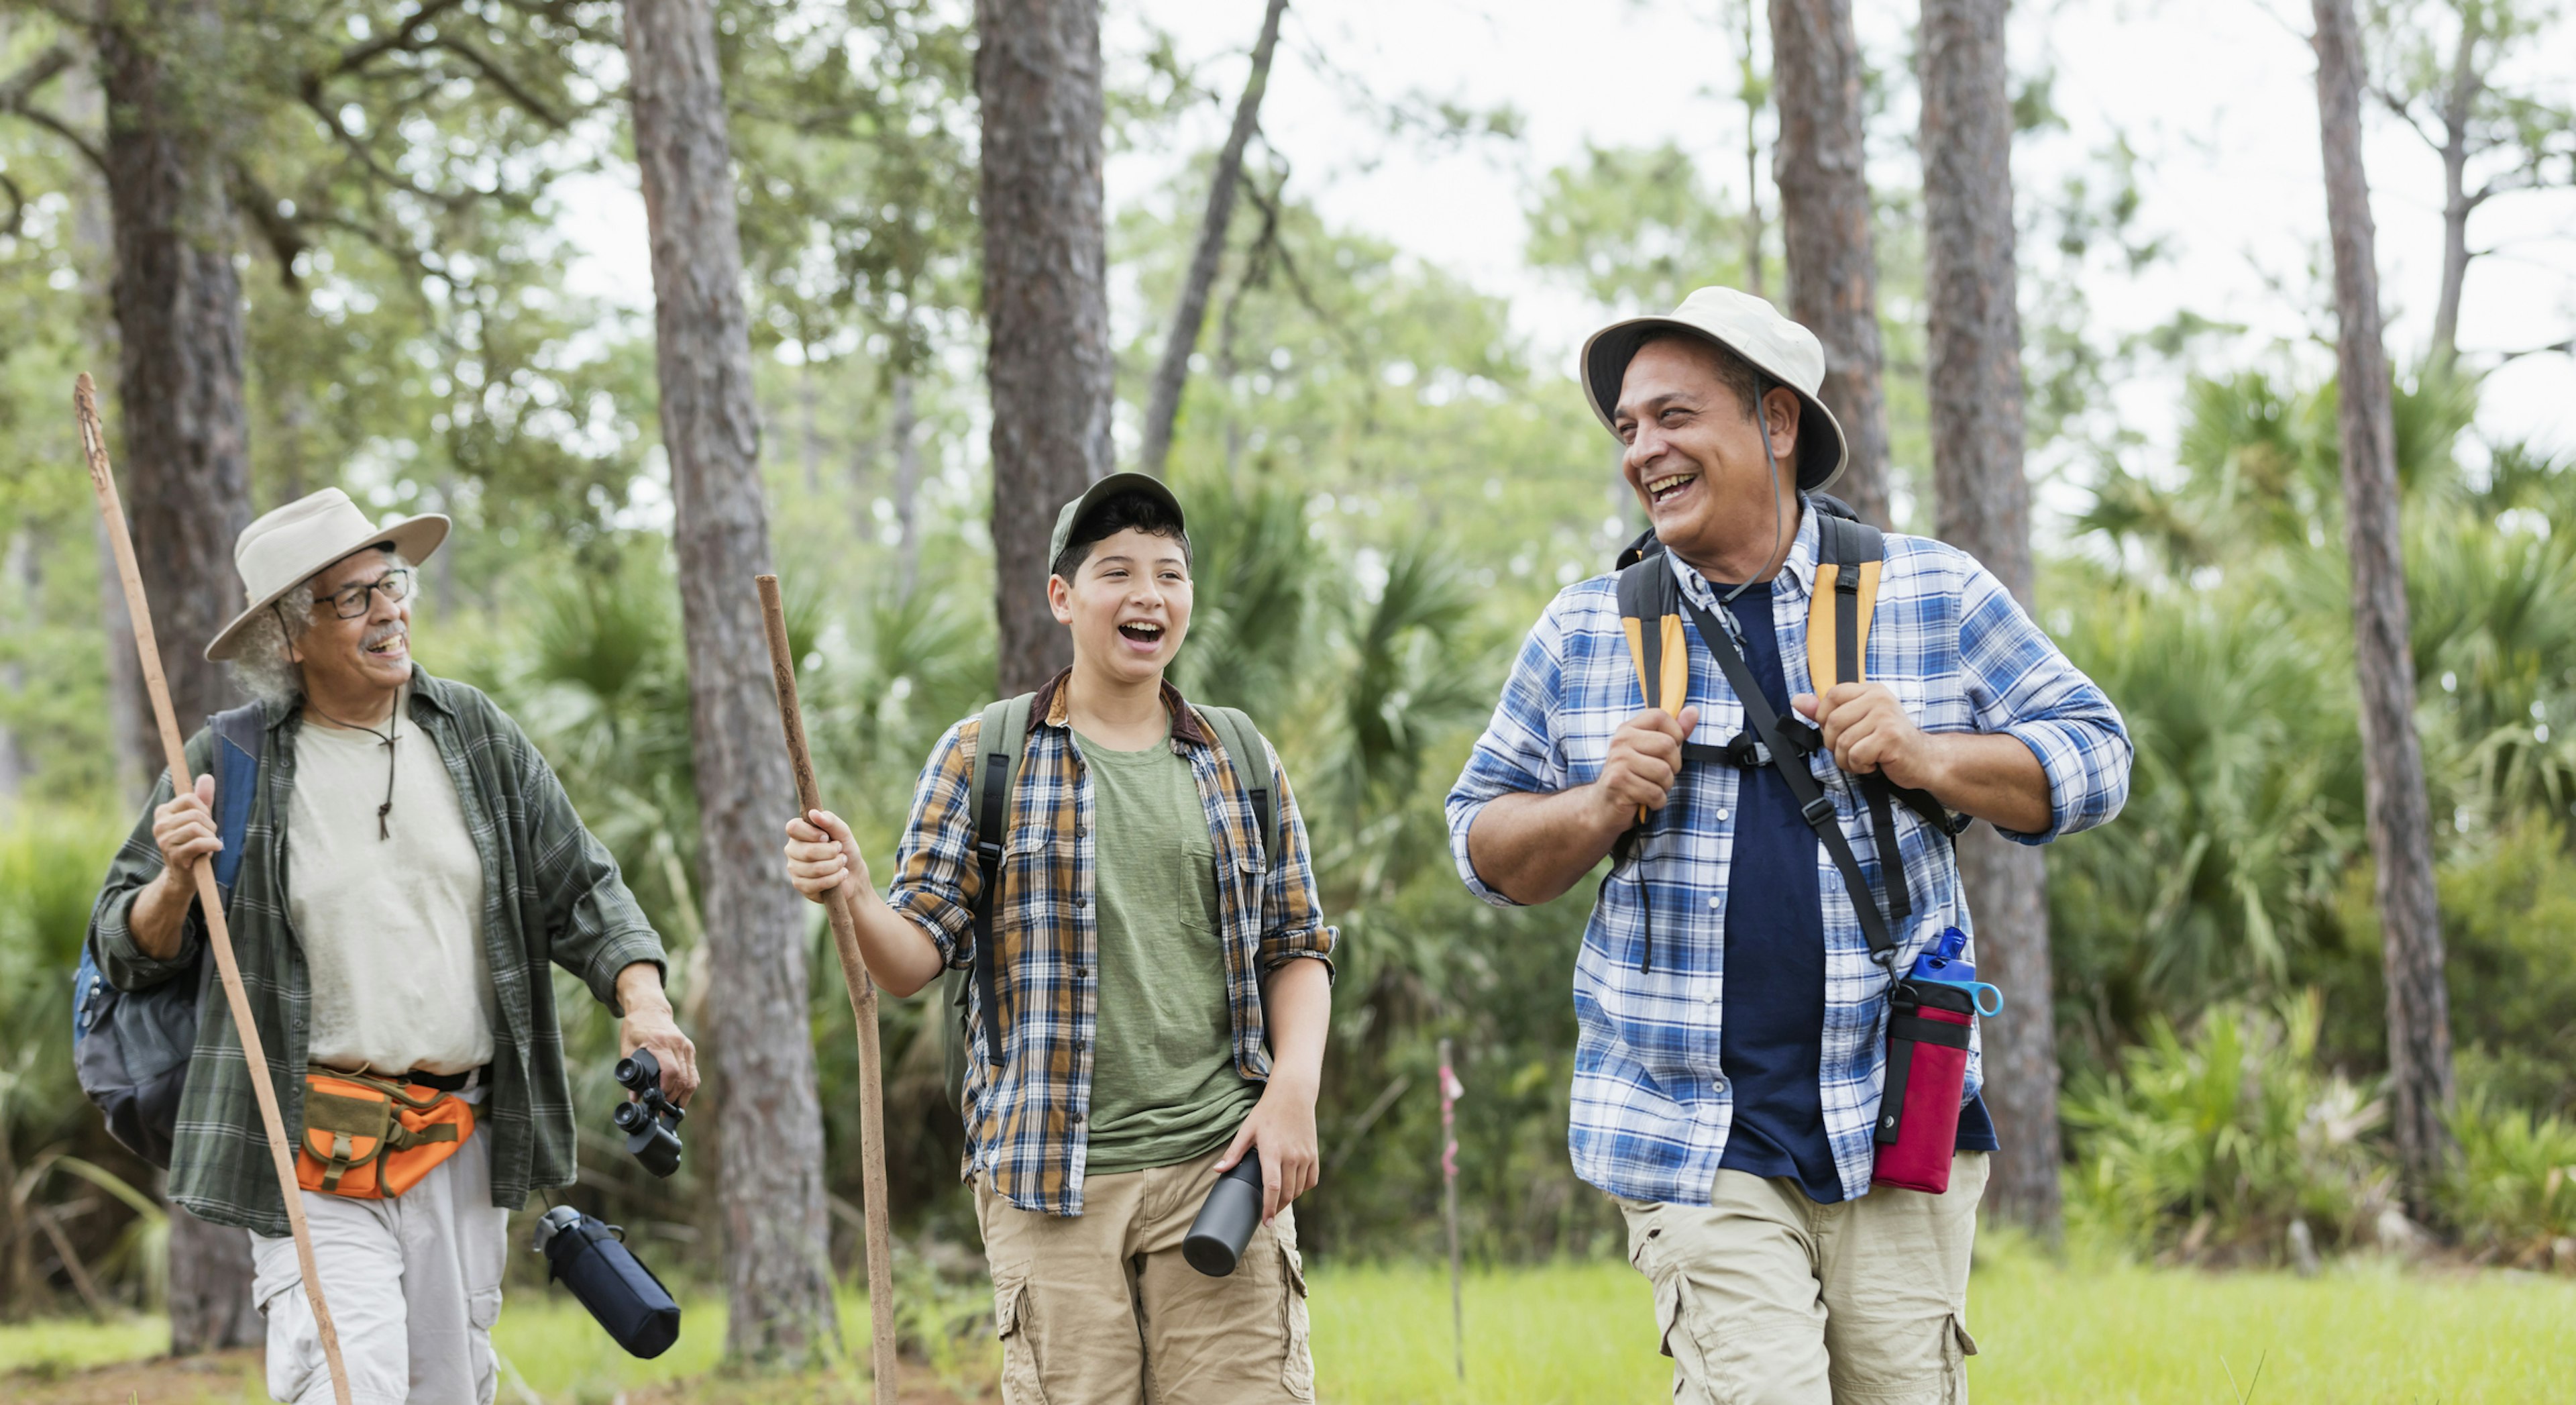 A multi-generation Hispanic family hiking together outdoors in the woods, wearing plaid shirts and hats and carrying walking sticks. The 12 year old boy walking in the middle, behind his father, a mature man in his 50s, and in front of his grandfather, a senior man in his 80s.
1129648546
hiking, healthy lifestyle, leisure activity, public park, natural parkland, woodland, nature, exploration, discovery, summer, springtime, outdoors, casual clothing, plaid shirt, hat, hiking pole, three people, senior men, mature men, boys, latin american and hispanic ethnicity, child, 12-13 years, 50-54 years, 80-89 years, vitality, active seniors, multi-generation family, father, son, grandfather, grandson, togetherness, bonding, friendship, smiling, happiness, cheerful, relaxation, candid, walking, talking, laughing, real people, waist up, florida - us state, adventure, retirement, sc0993